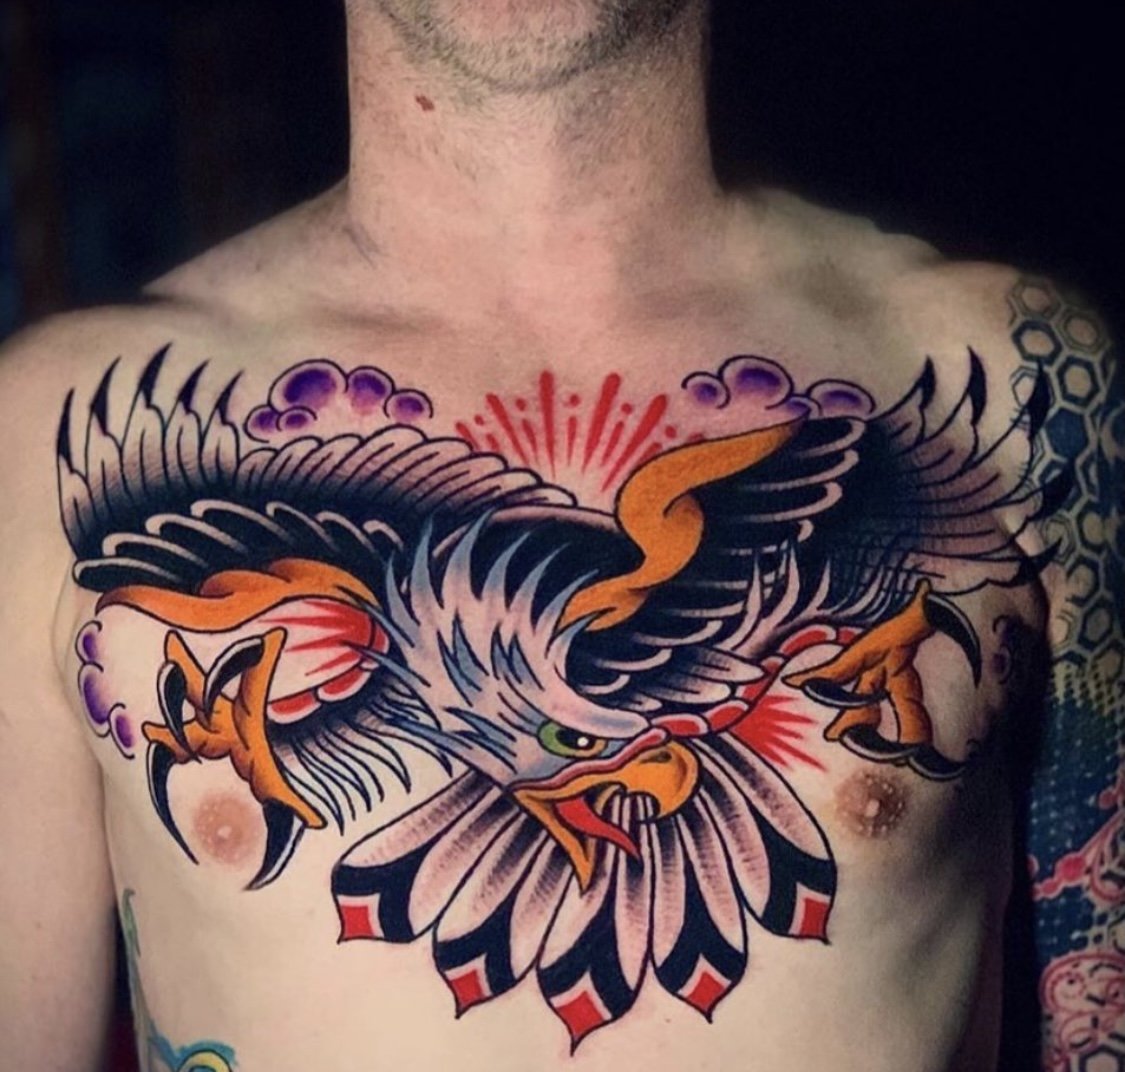  on Instagram Thank you for the trust Roger  envisiontattoo  eagle  snake chest tattoo american traditional yee southerncalifornia